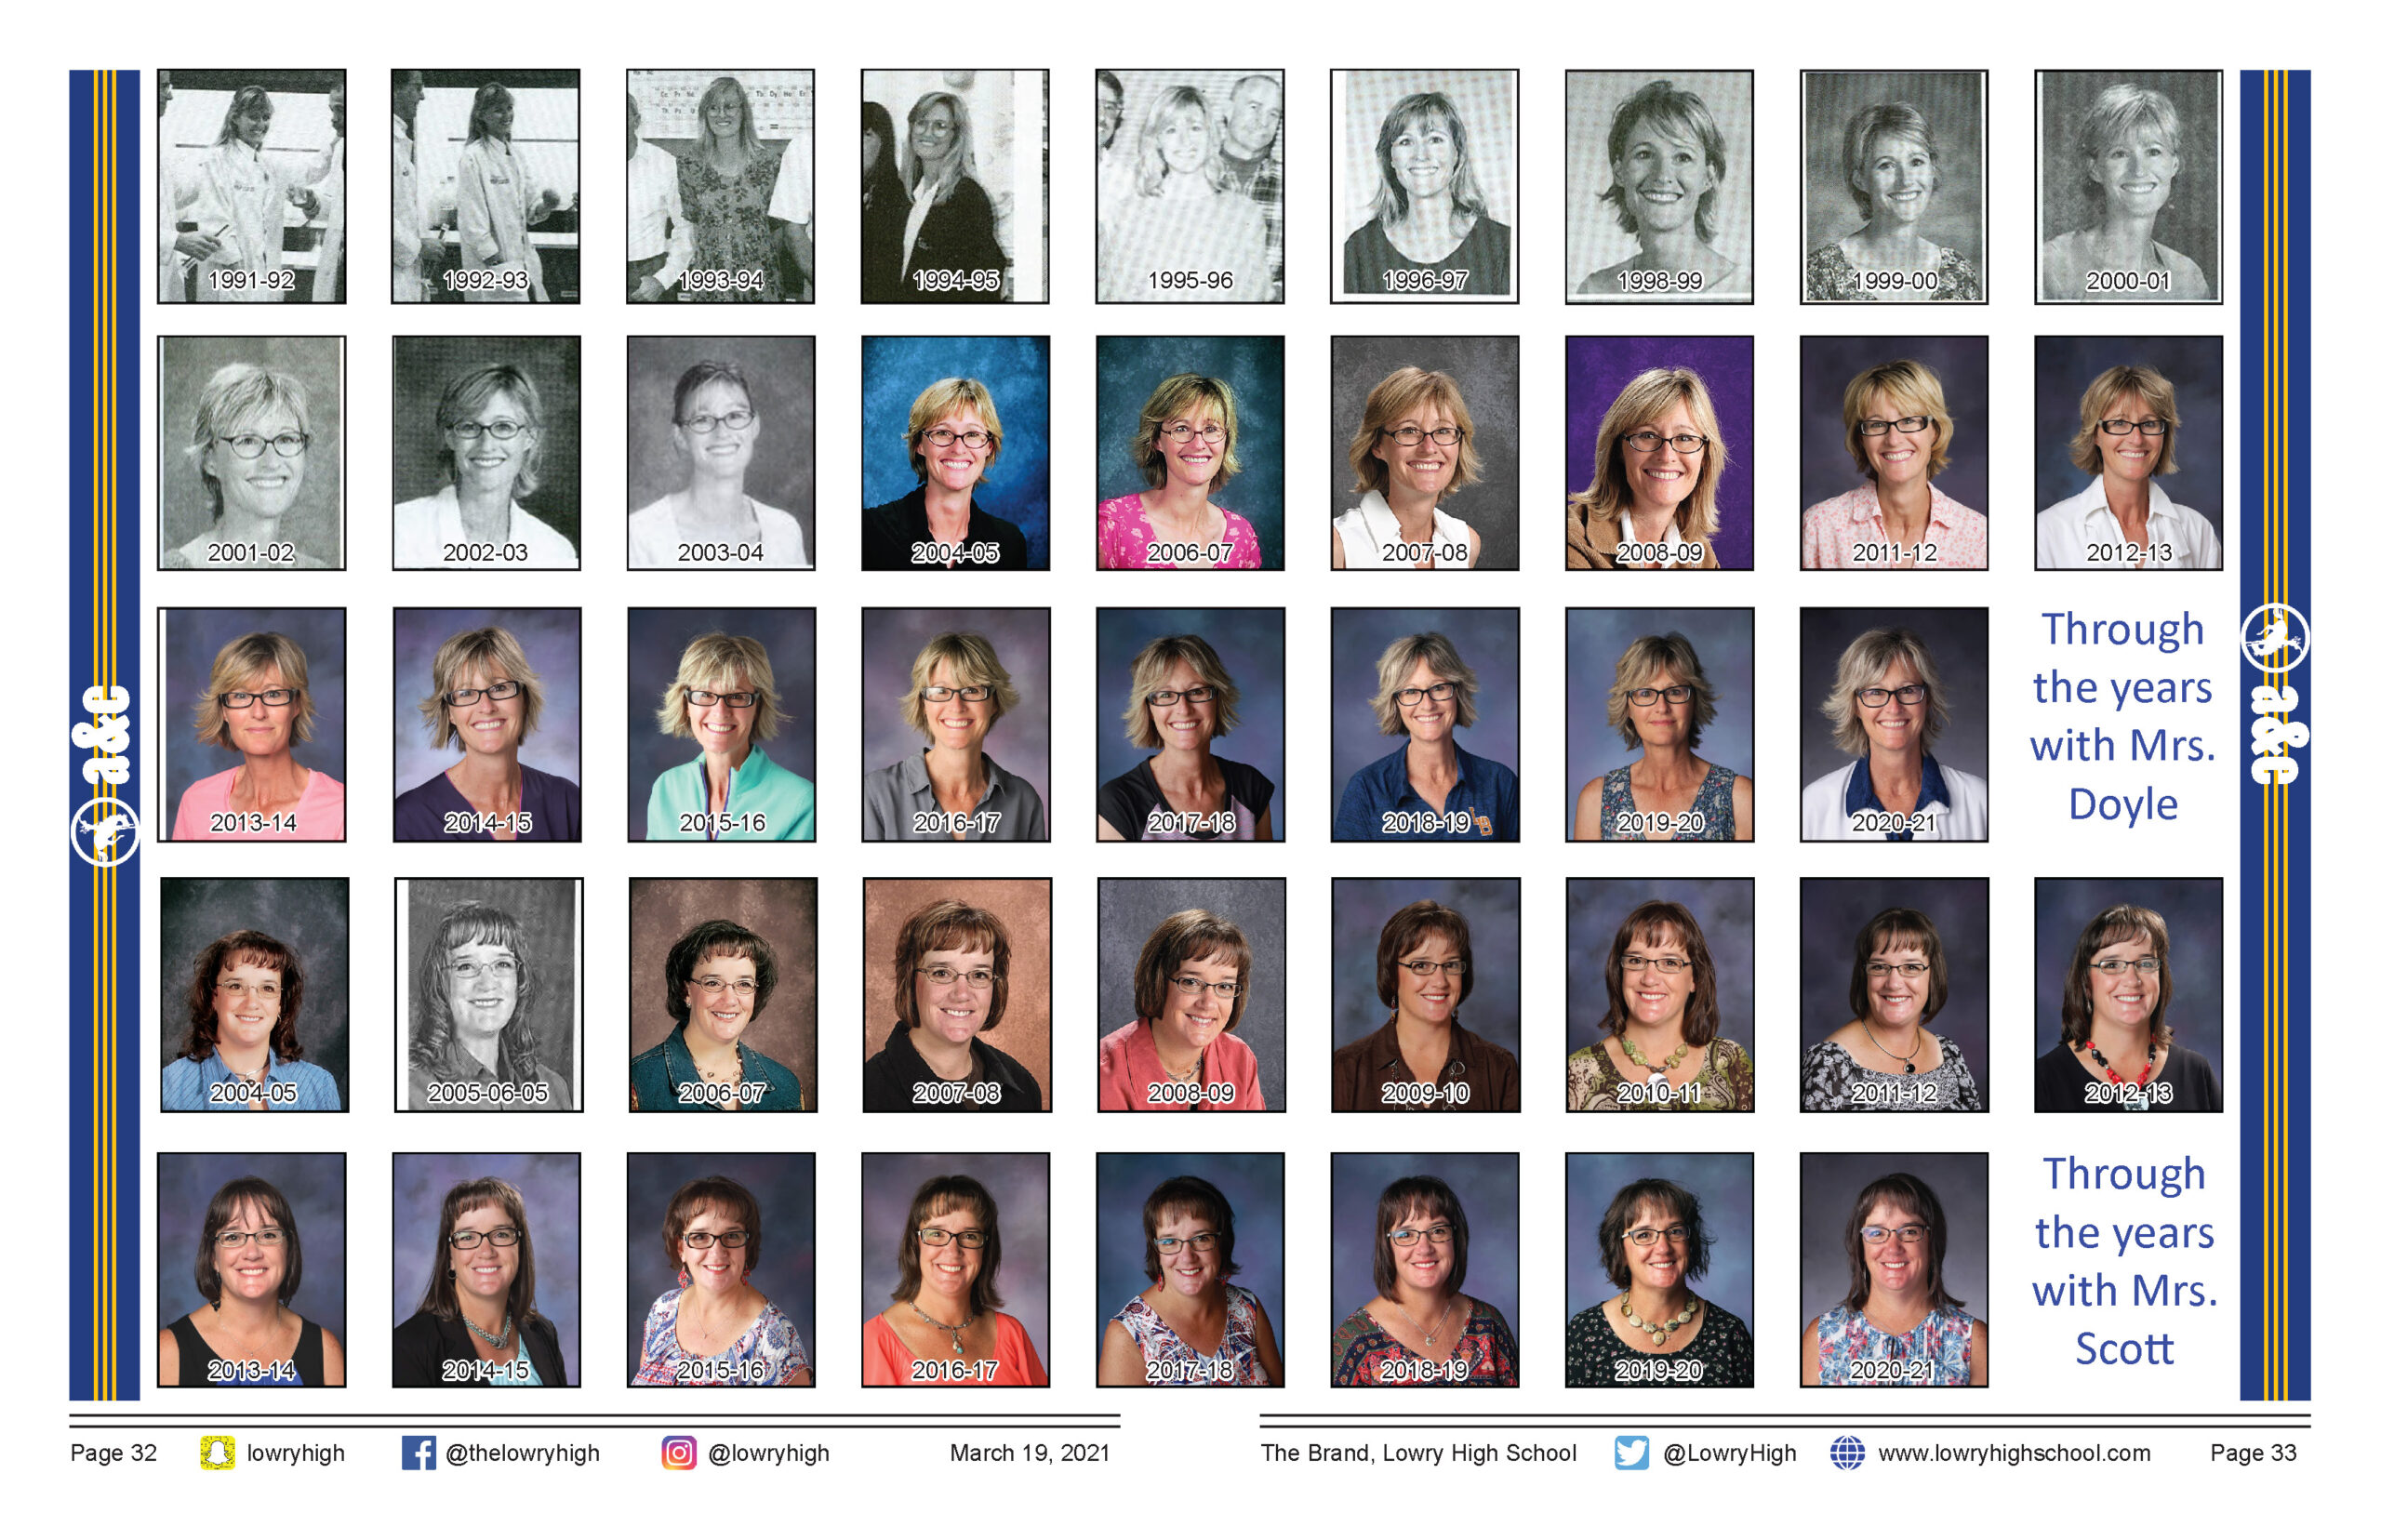 Through the years with Mrs. Doyle and Mrs. Scott